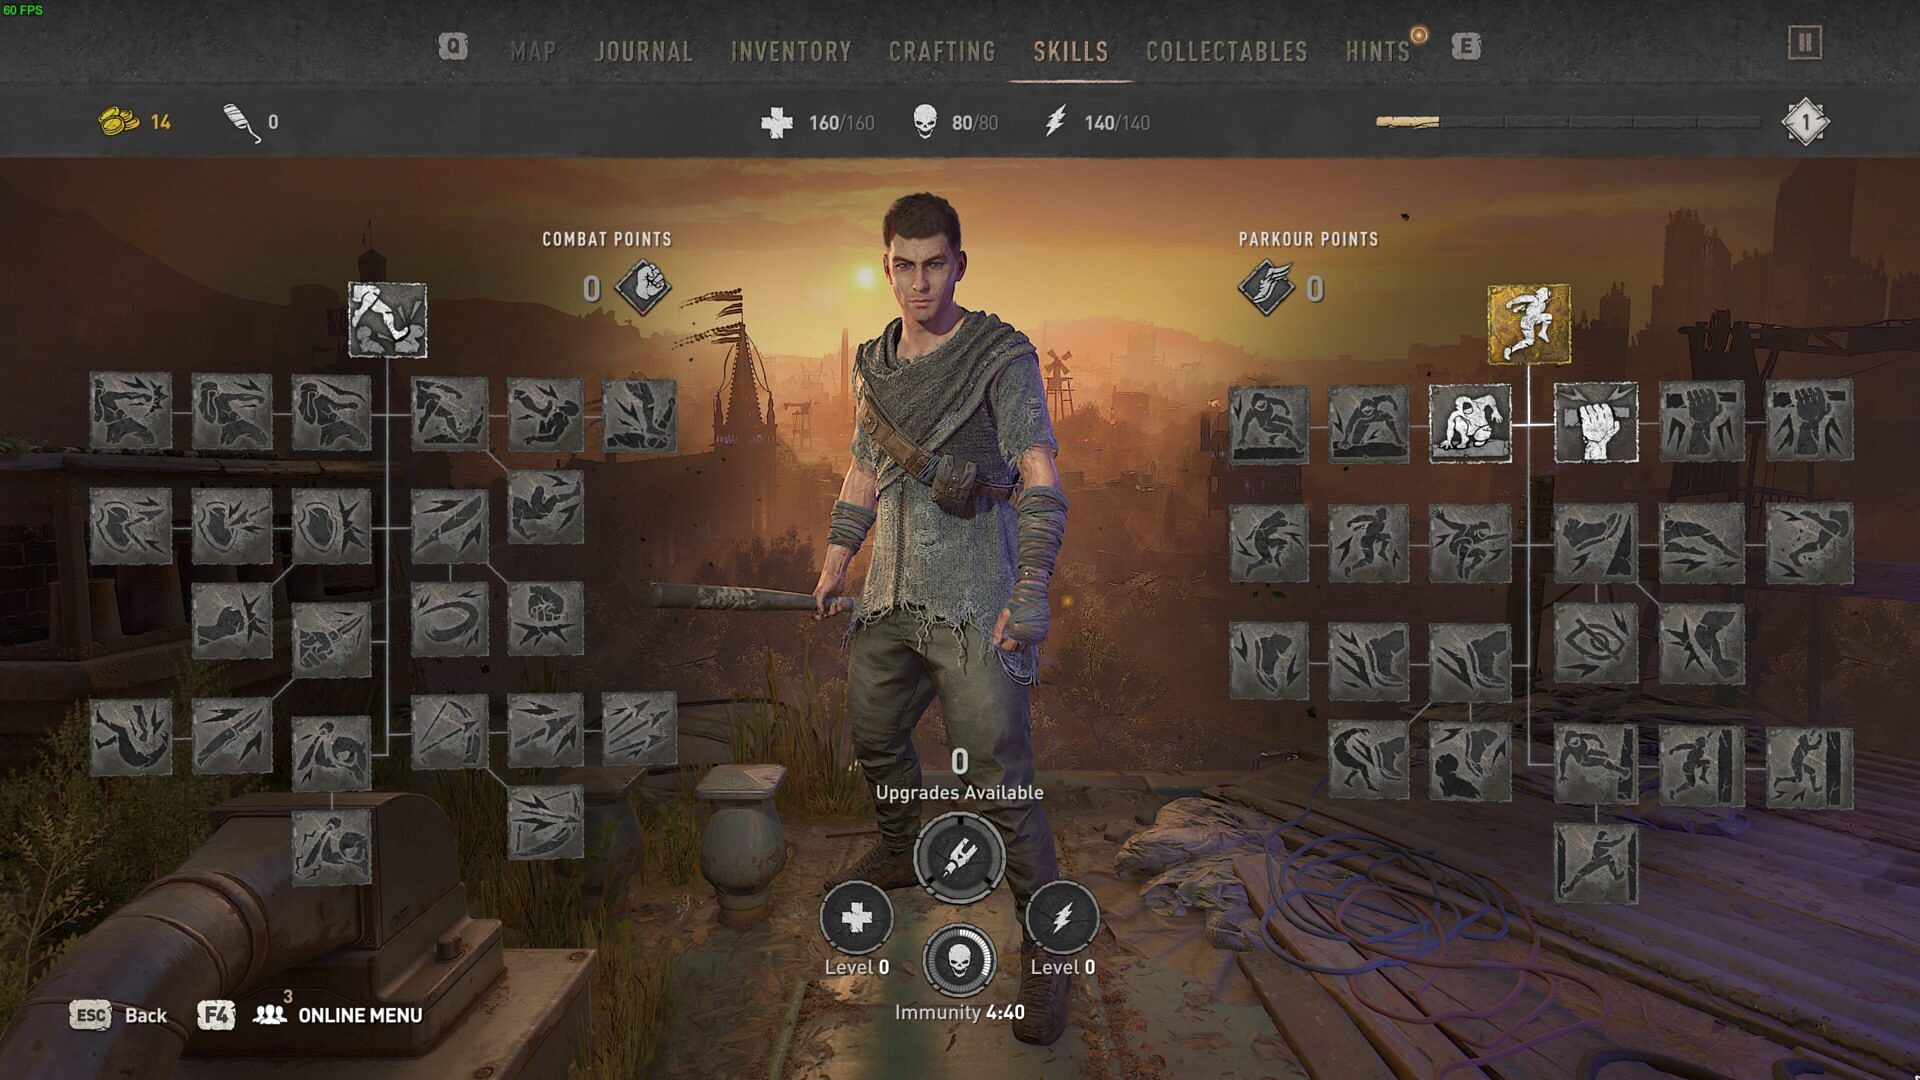 A look at the Skills menu in Dying Light 2 (Image via Techland)